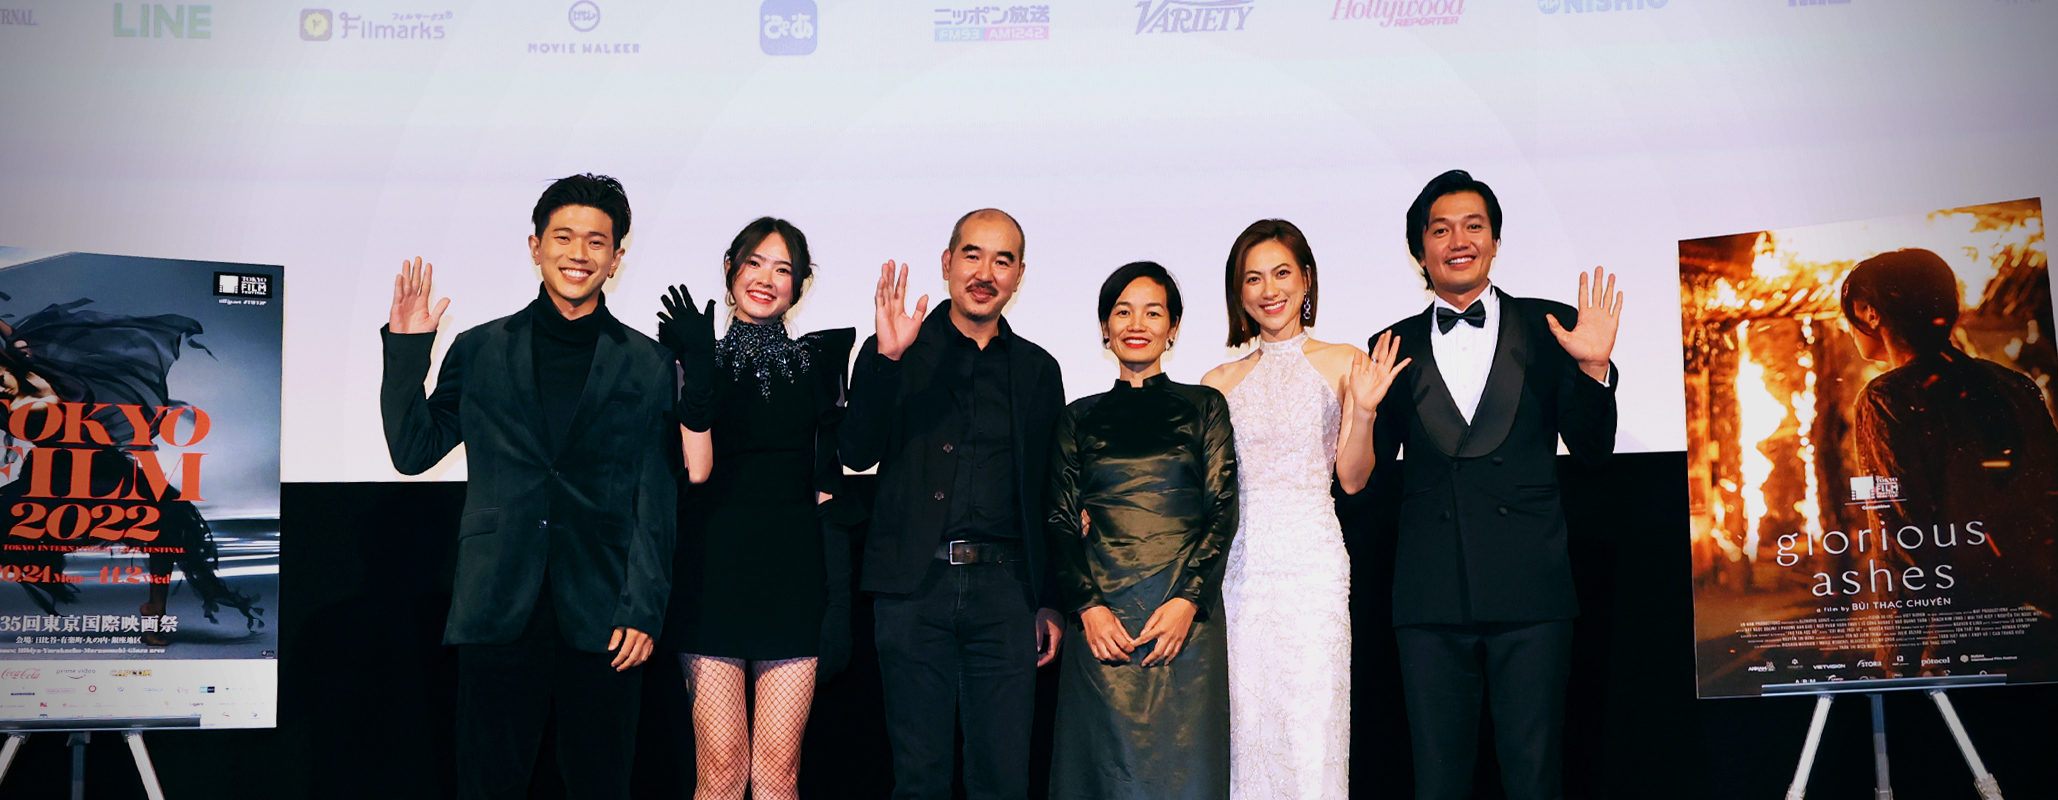 Glorious Ashes Q&A: Bui Thac Chuyen (Director), Le Cong Hoang (Cast), Juliet Bao Ngoc Doling (Cast), Phuong Anh Dao (Cast)